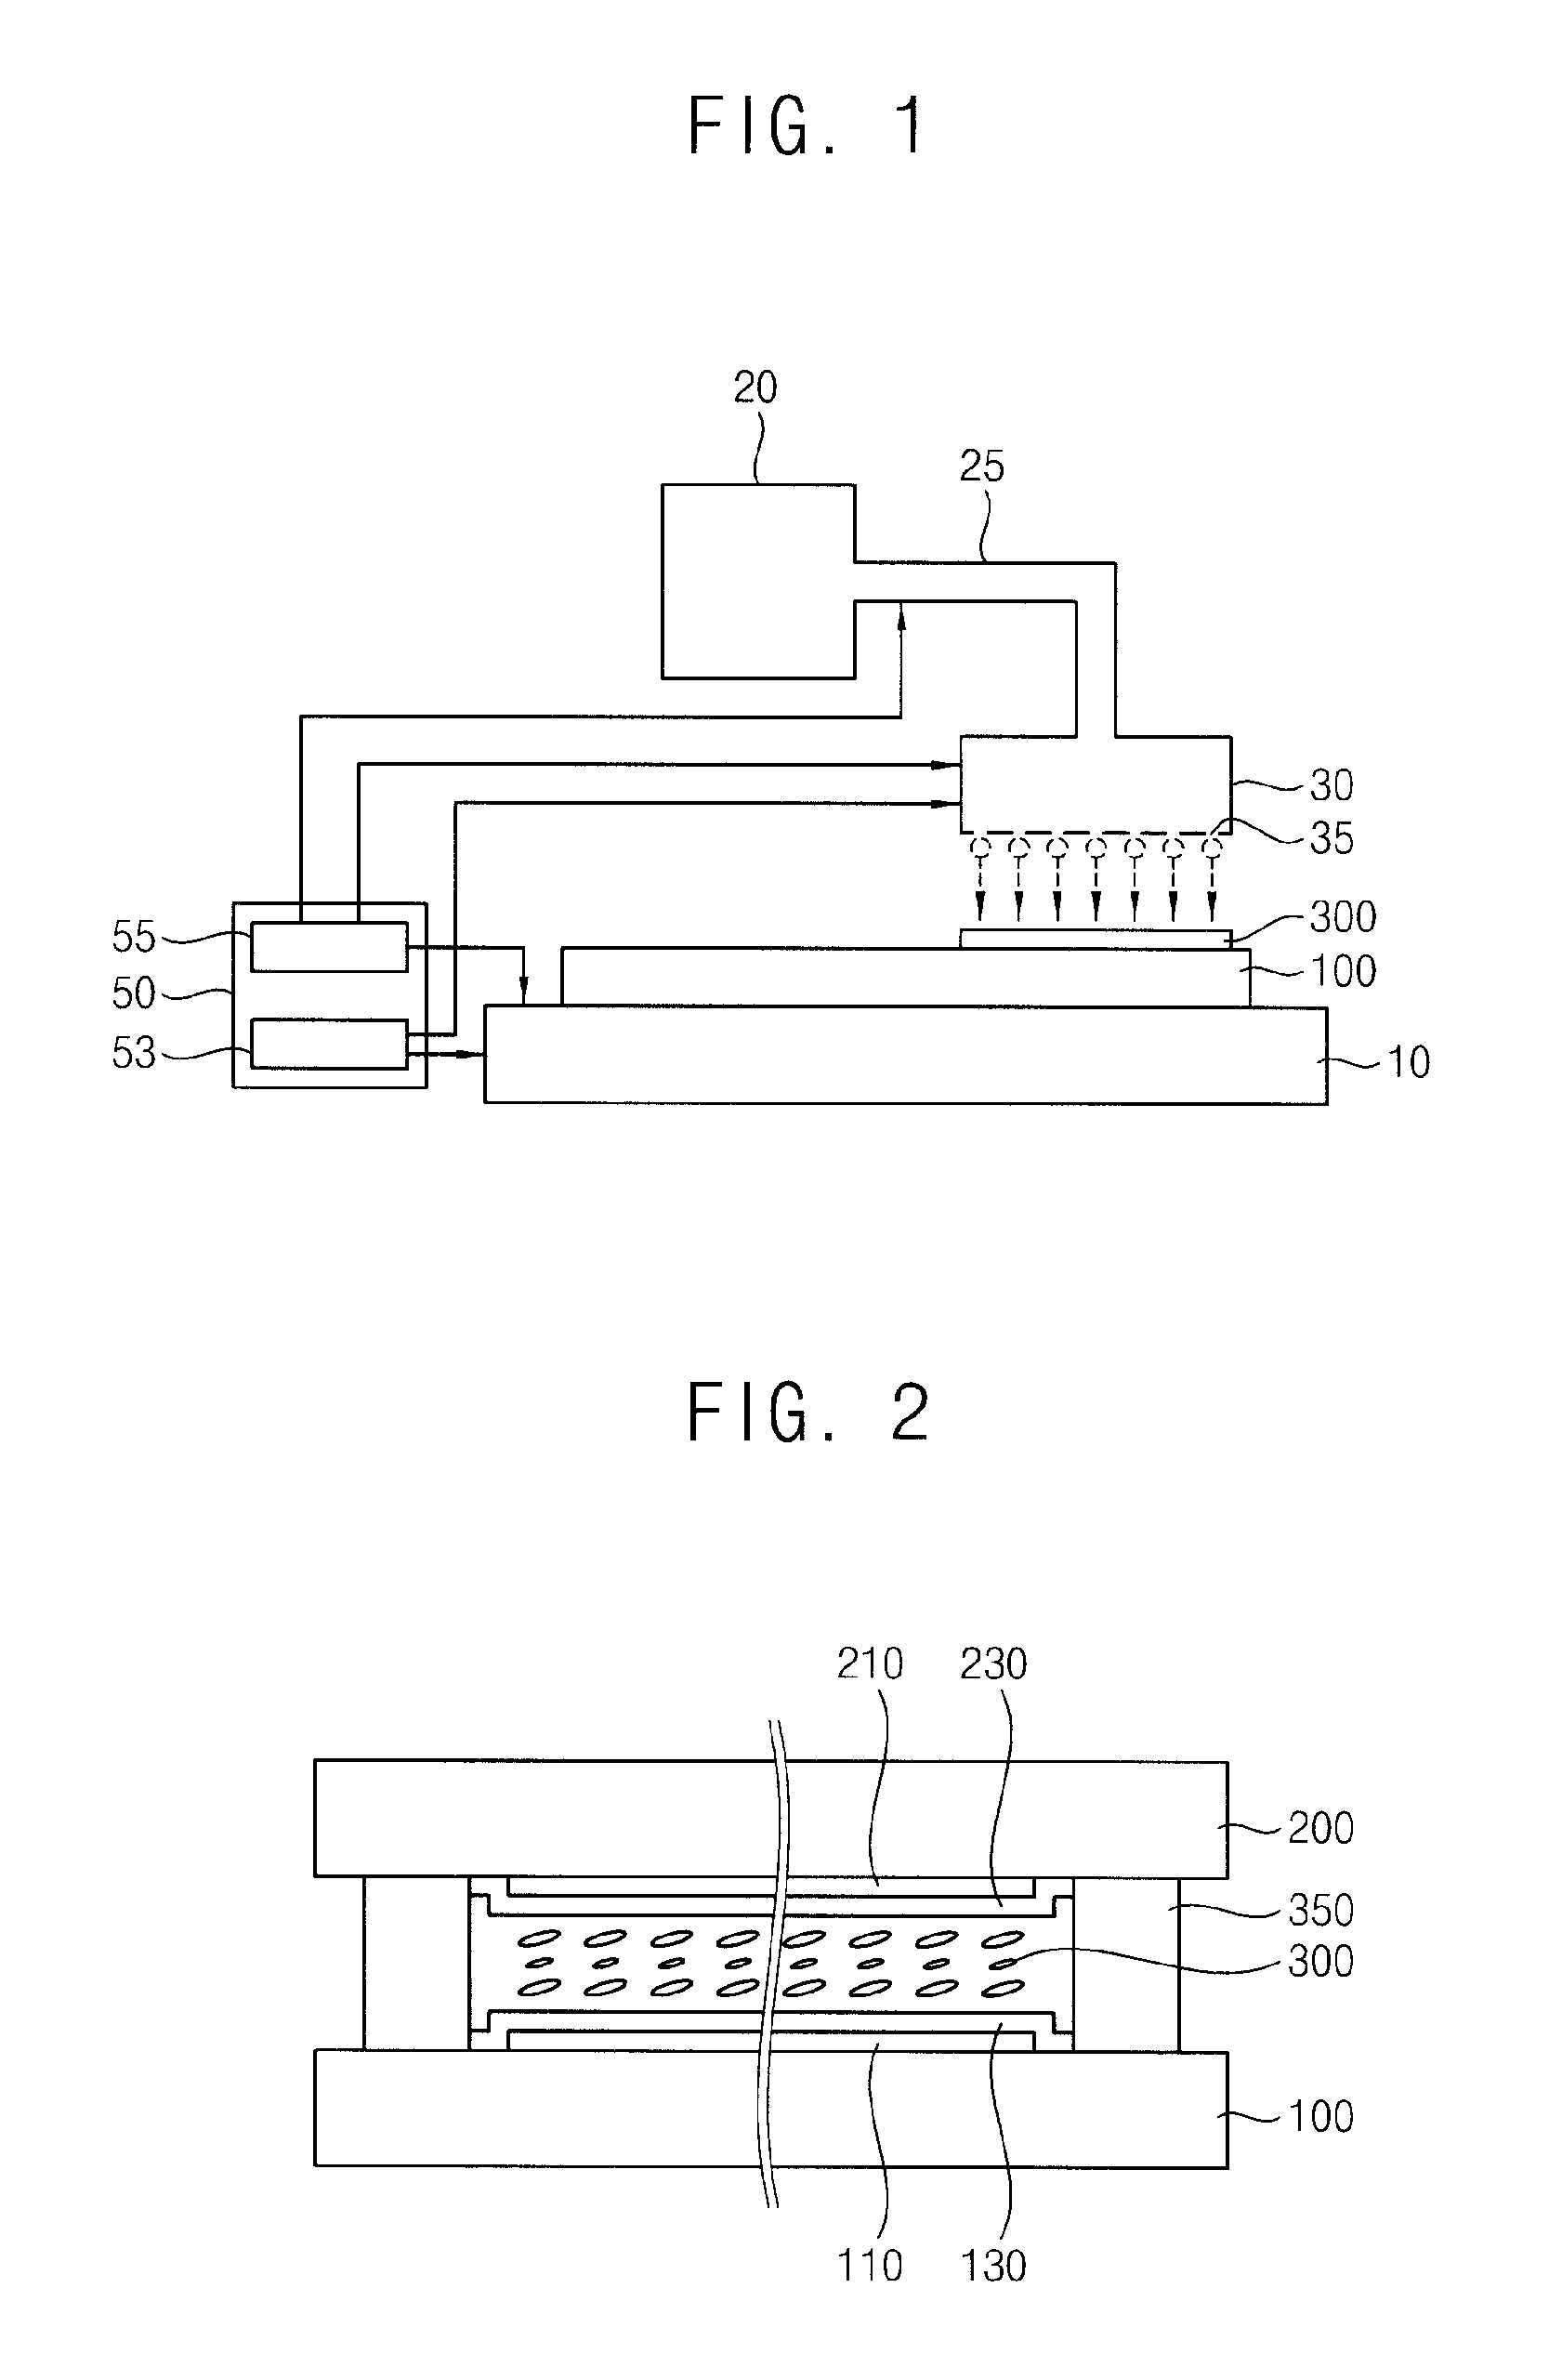 Method of forming a liquid crystal layer, method of manufacturing a liquid crystal display panel using the method, and liquid crystal material used in the method